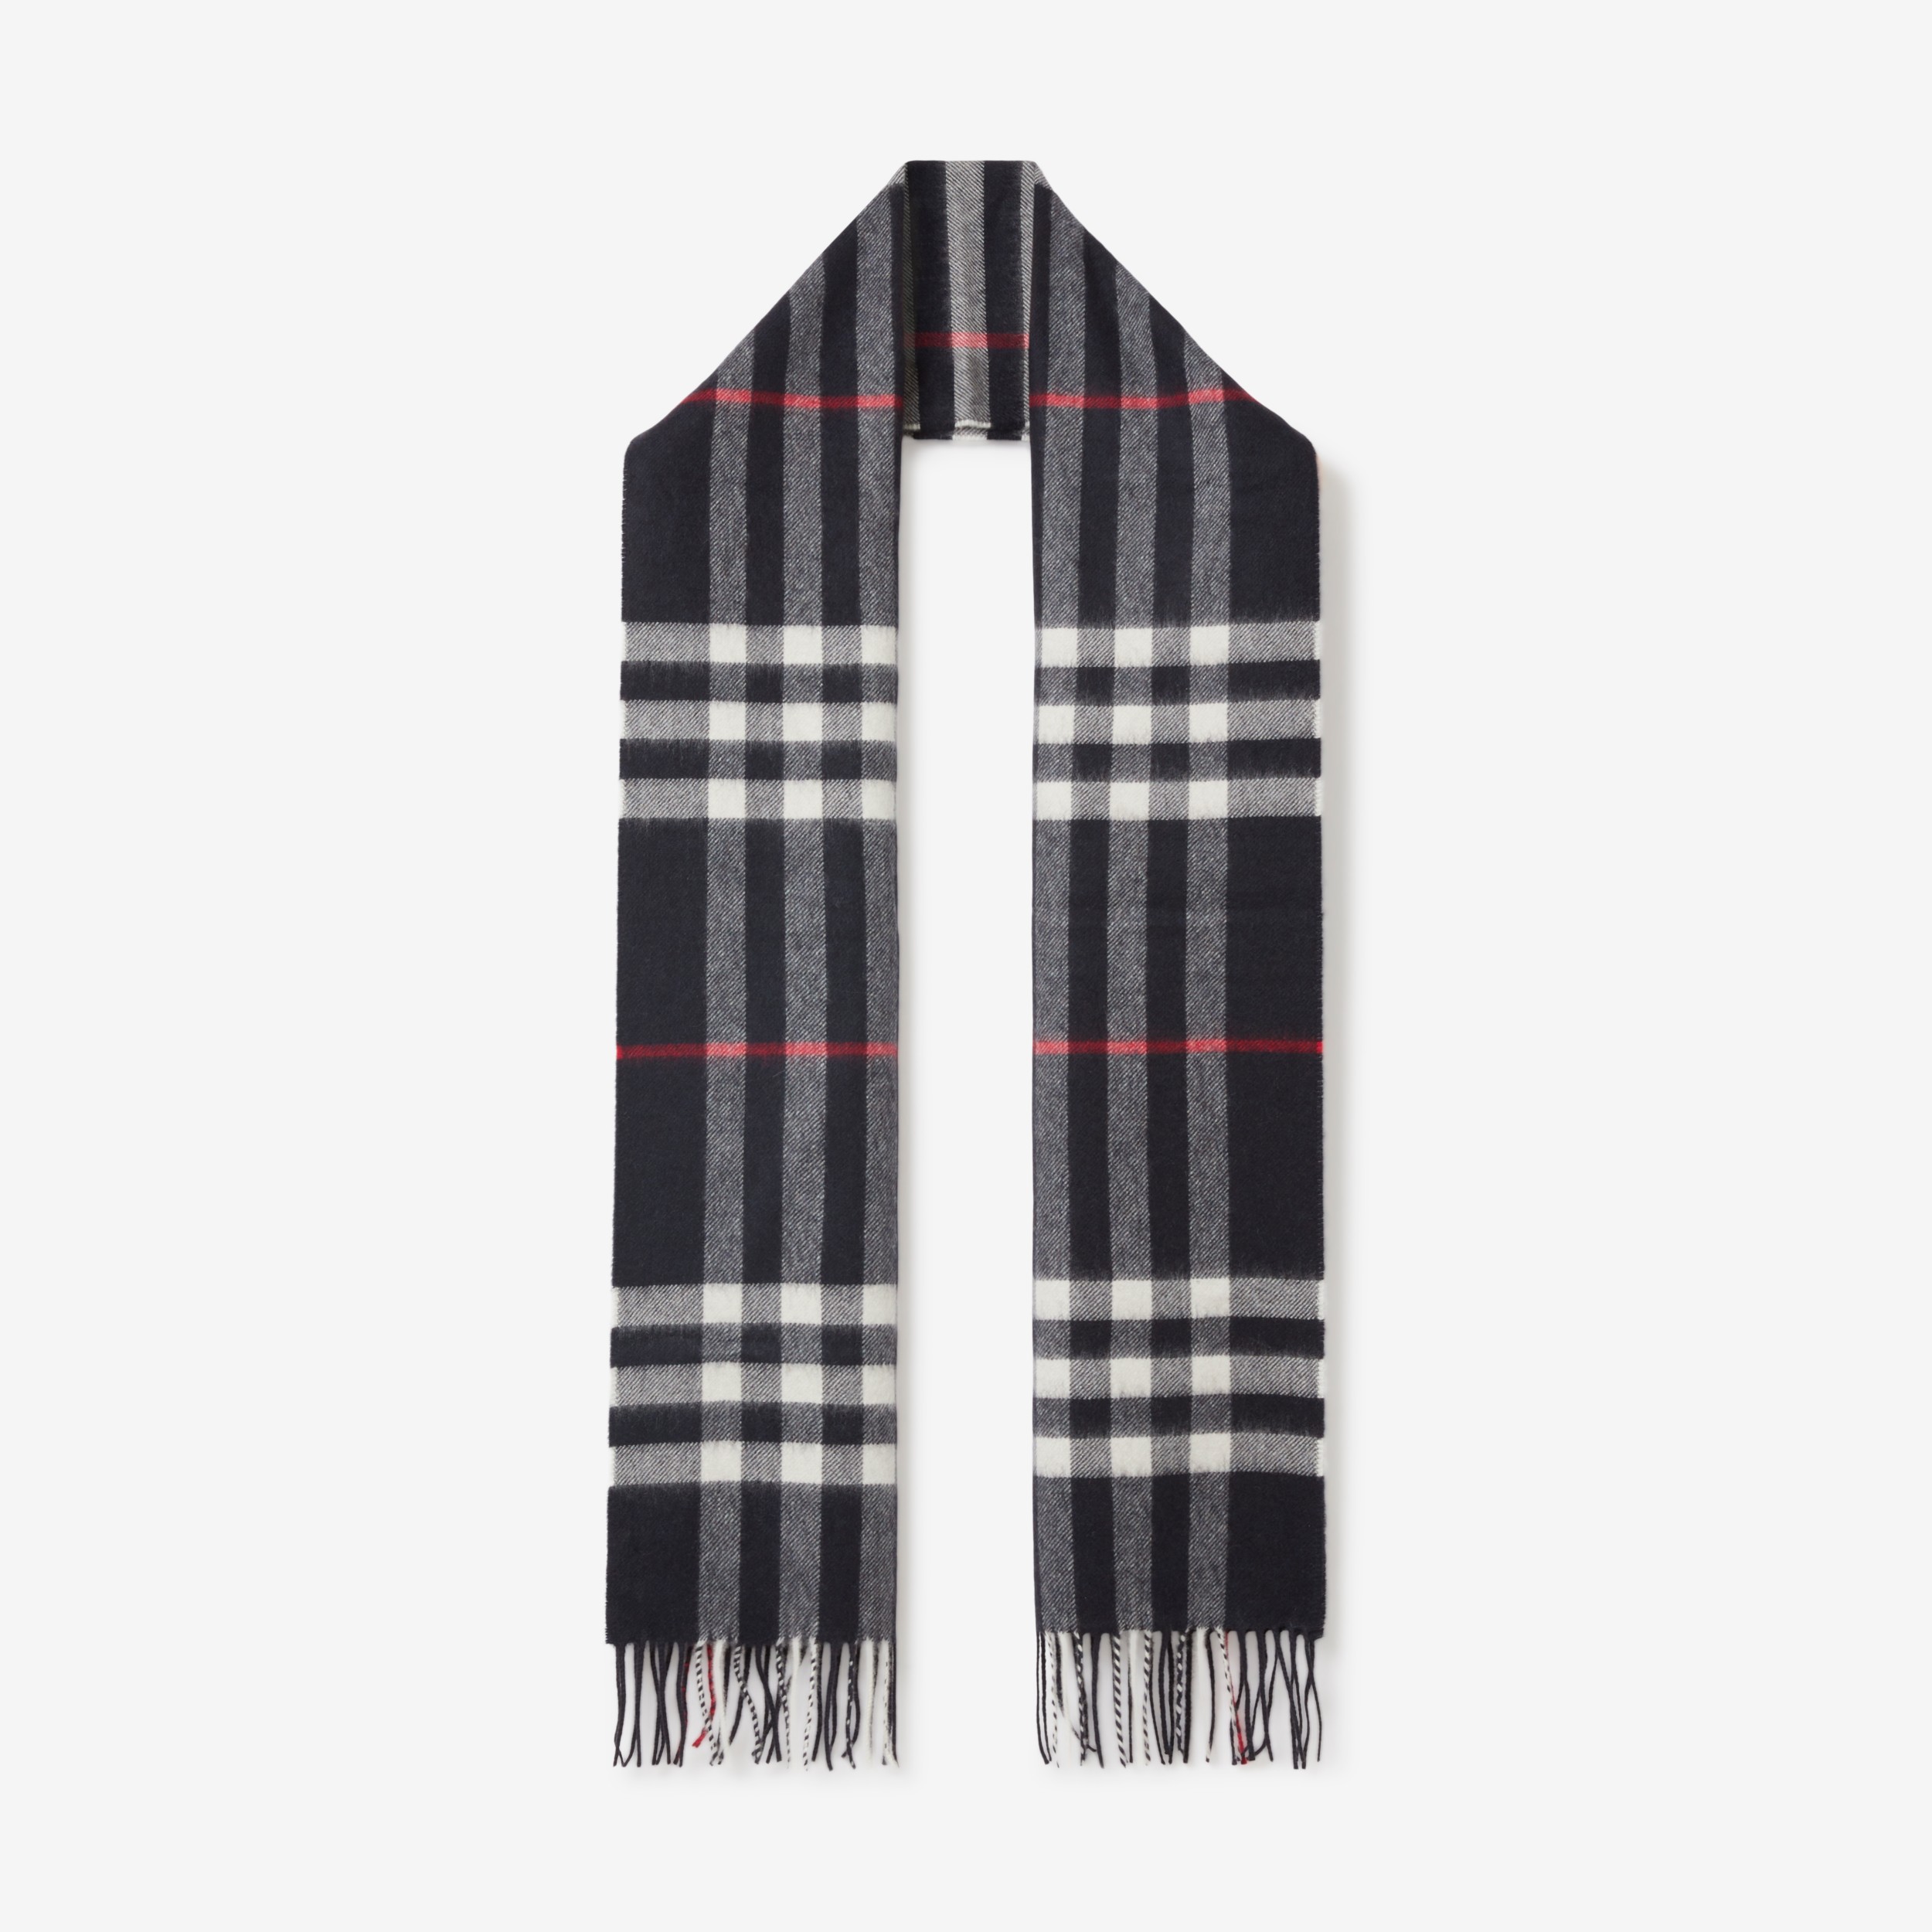 Burberry outlet atlanta, 52% off clearance 